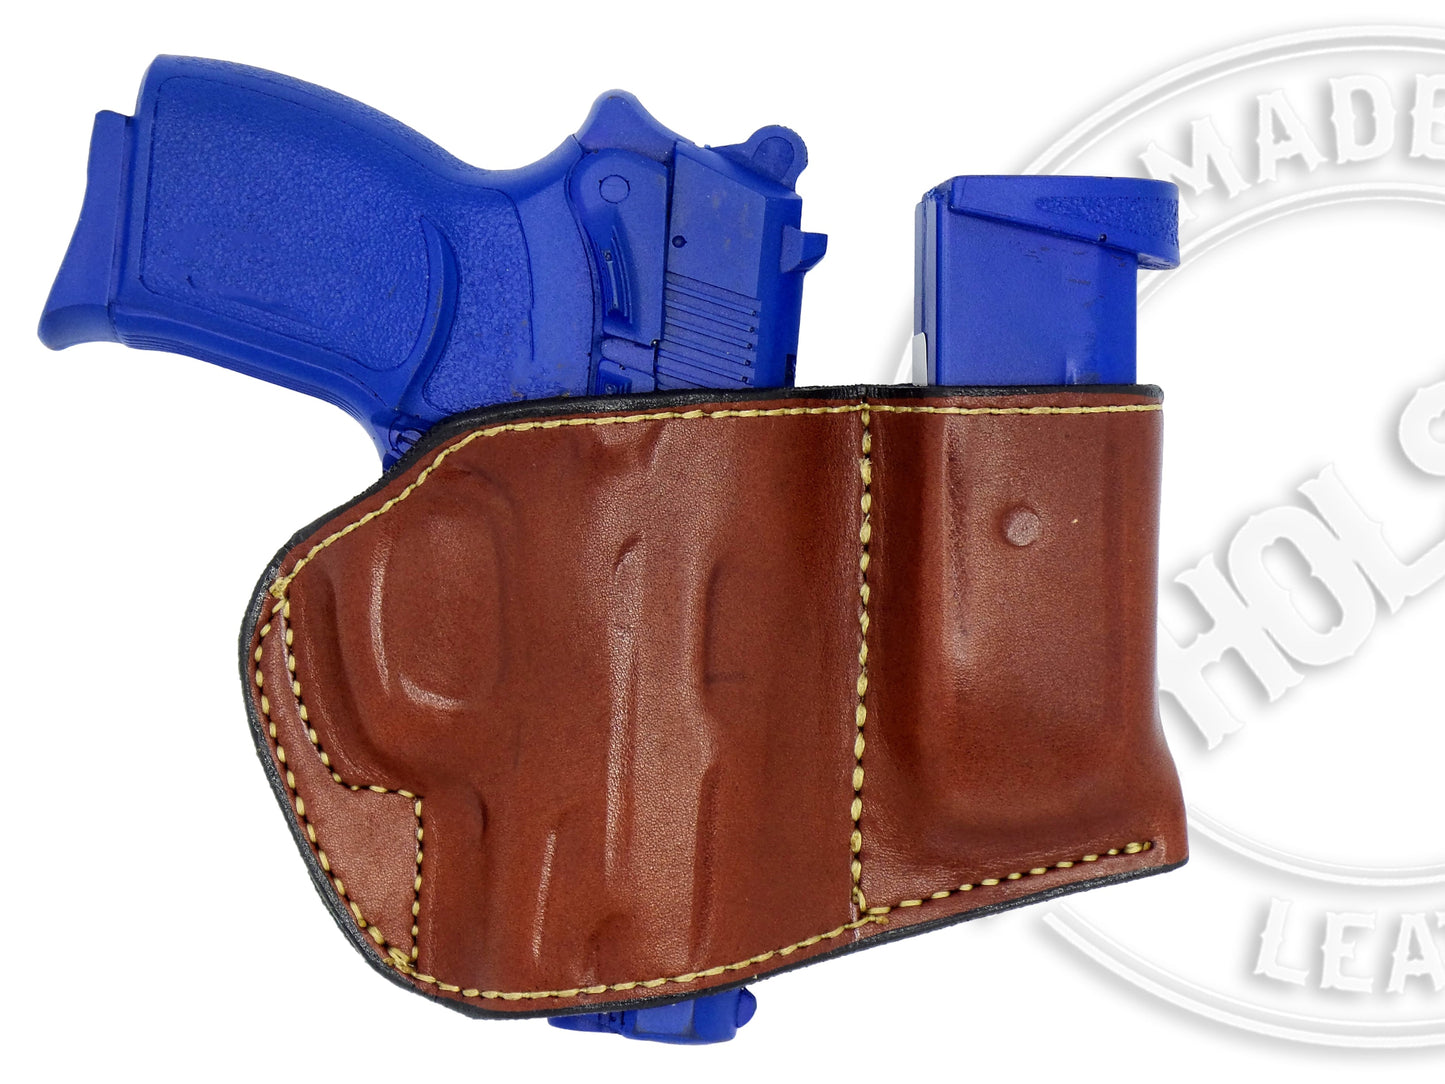 GLOCK 45 Holster and Mag Pouch Combo | OWB Leather Belt Holster